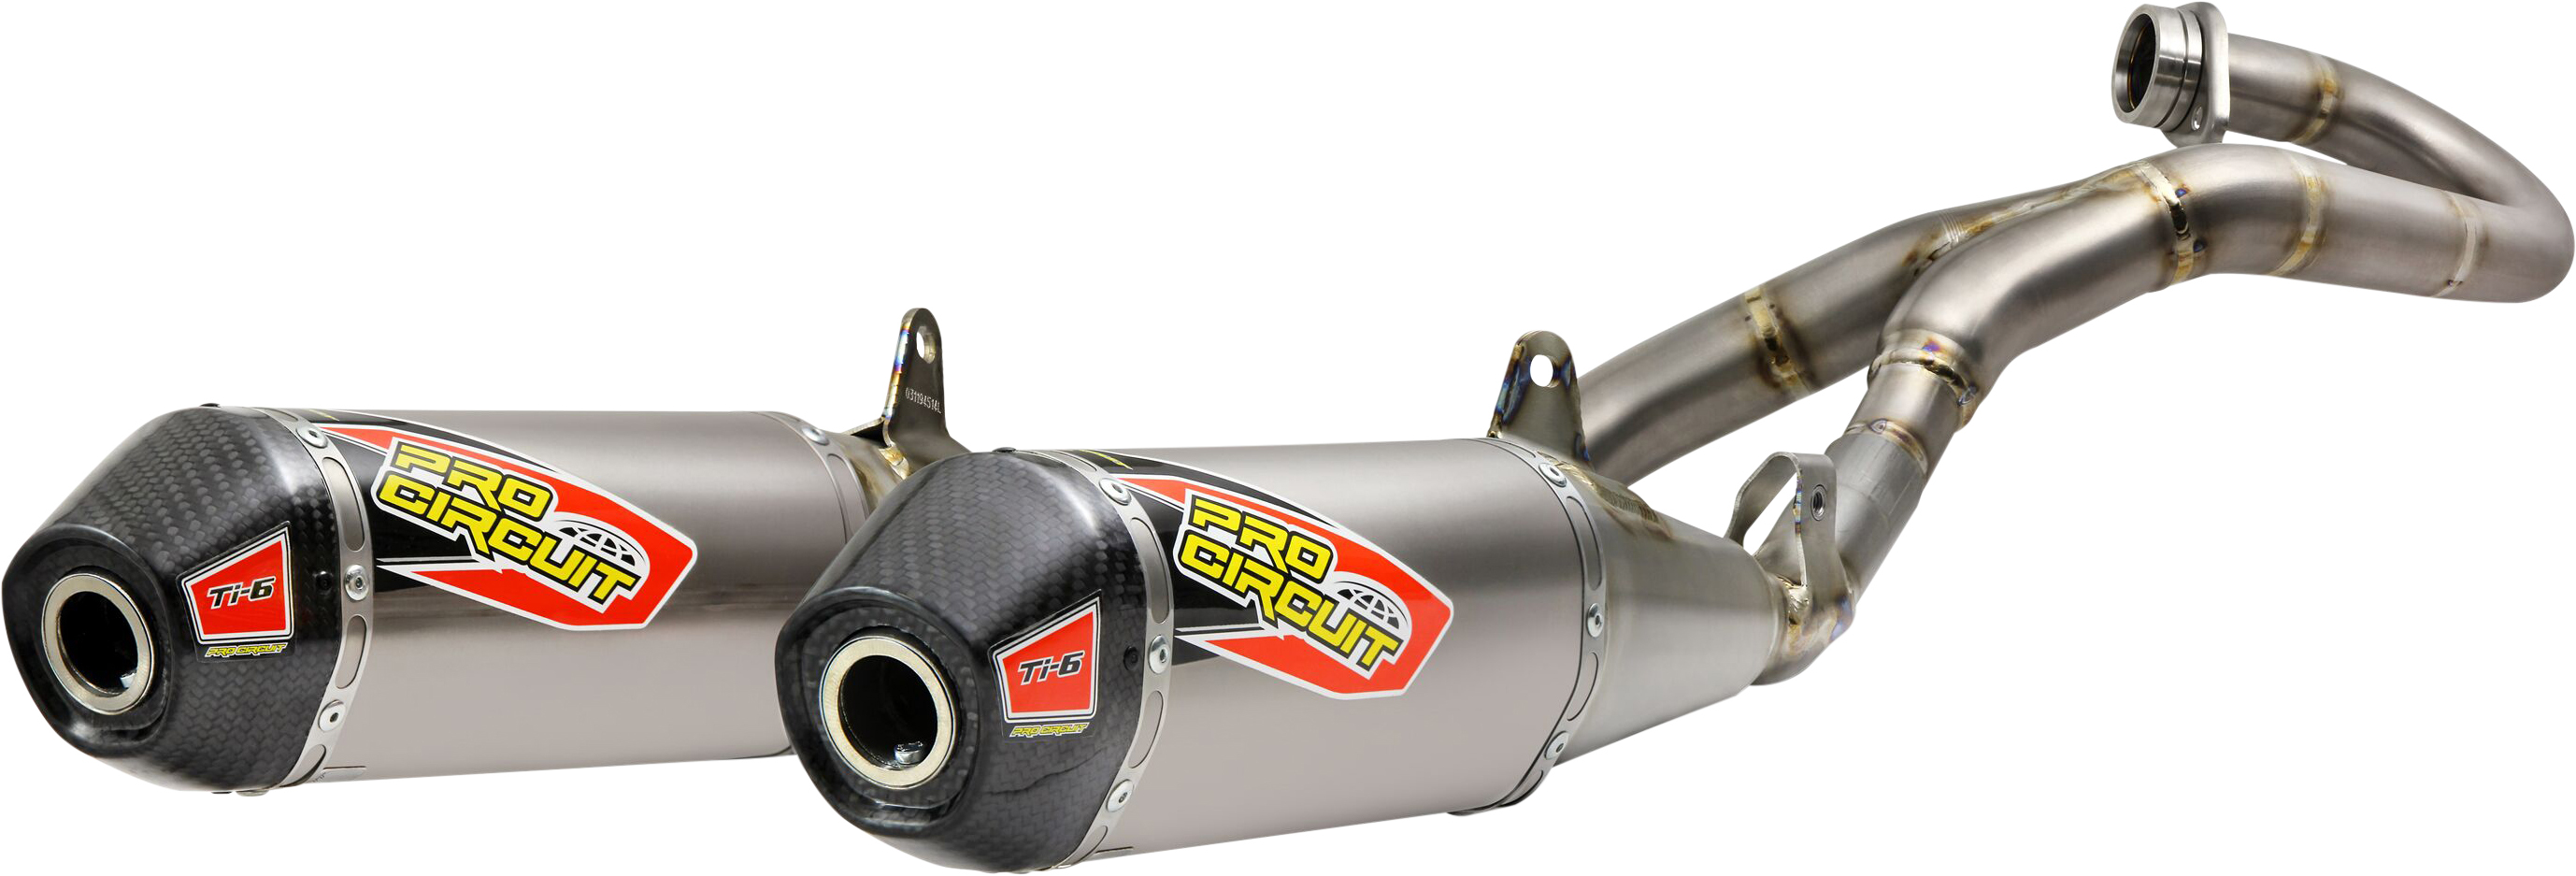 TI-6 Dual Full Exhaust - For 2020 Honda CRF250R CRF250RX - Click Image to Close